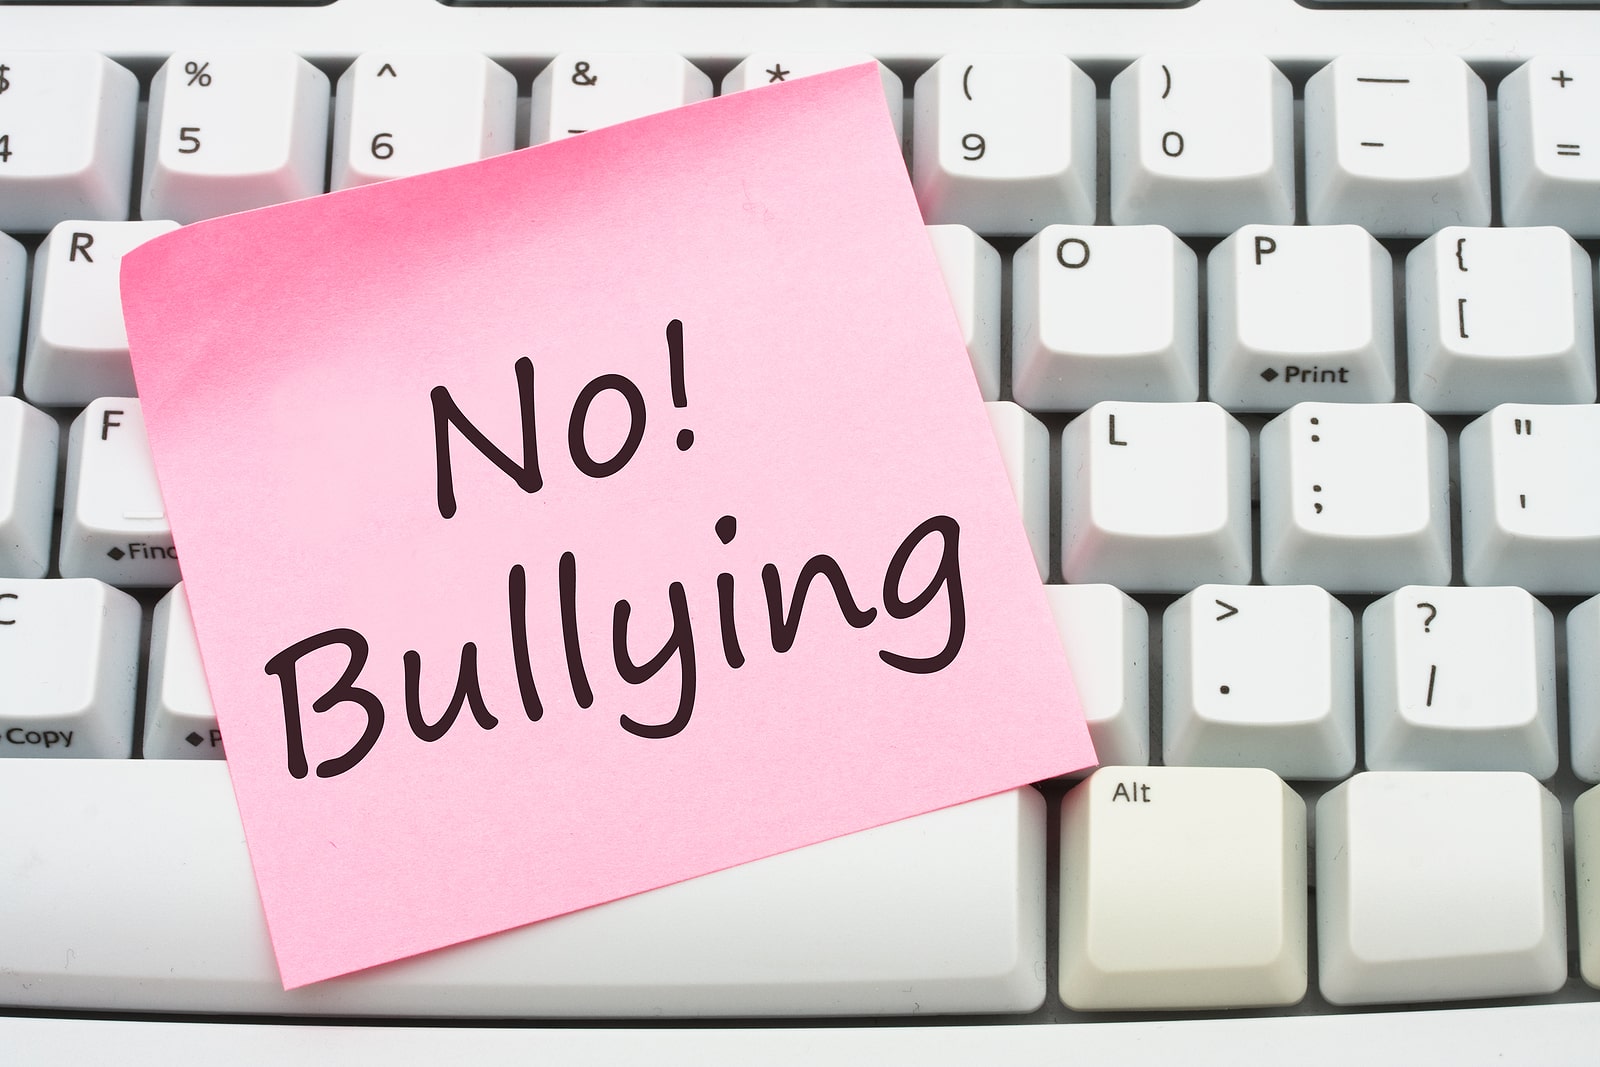 Nurse Bullying? Does it contribute to medical mistakes?